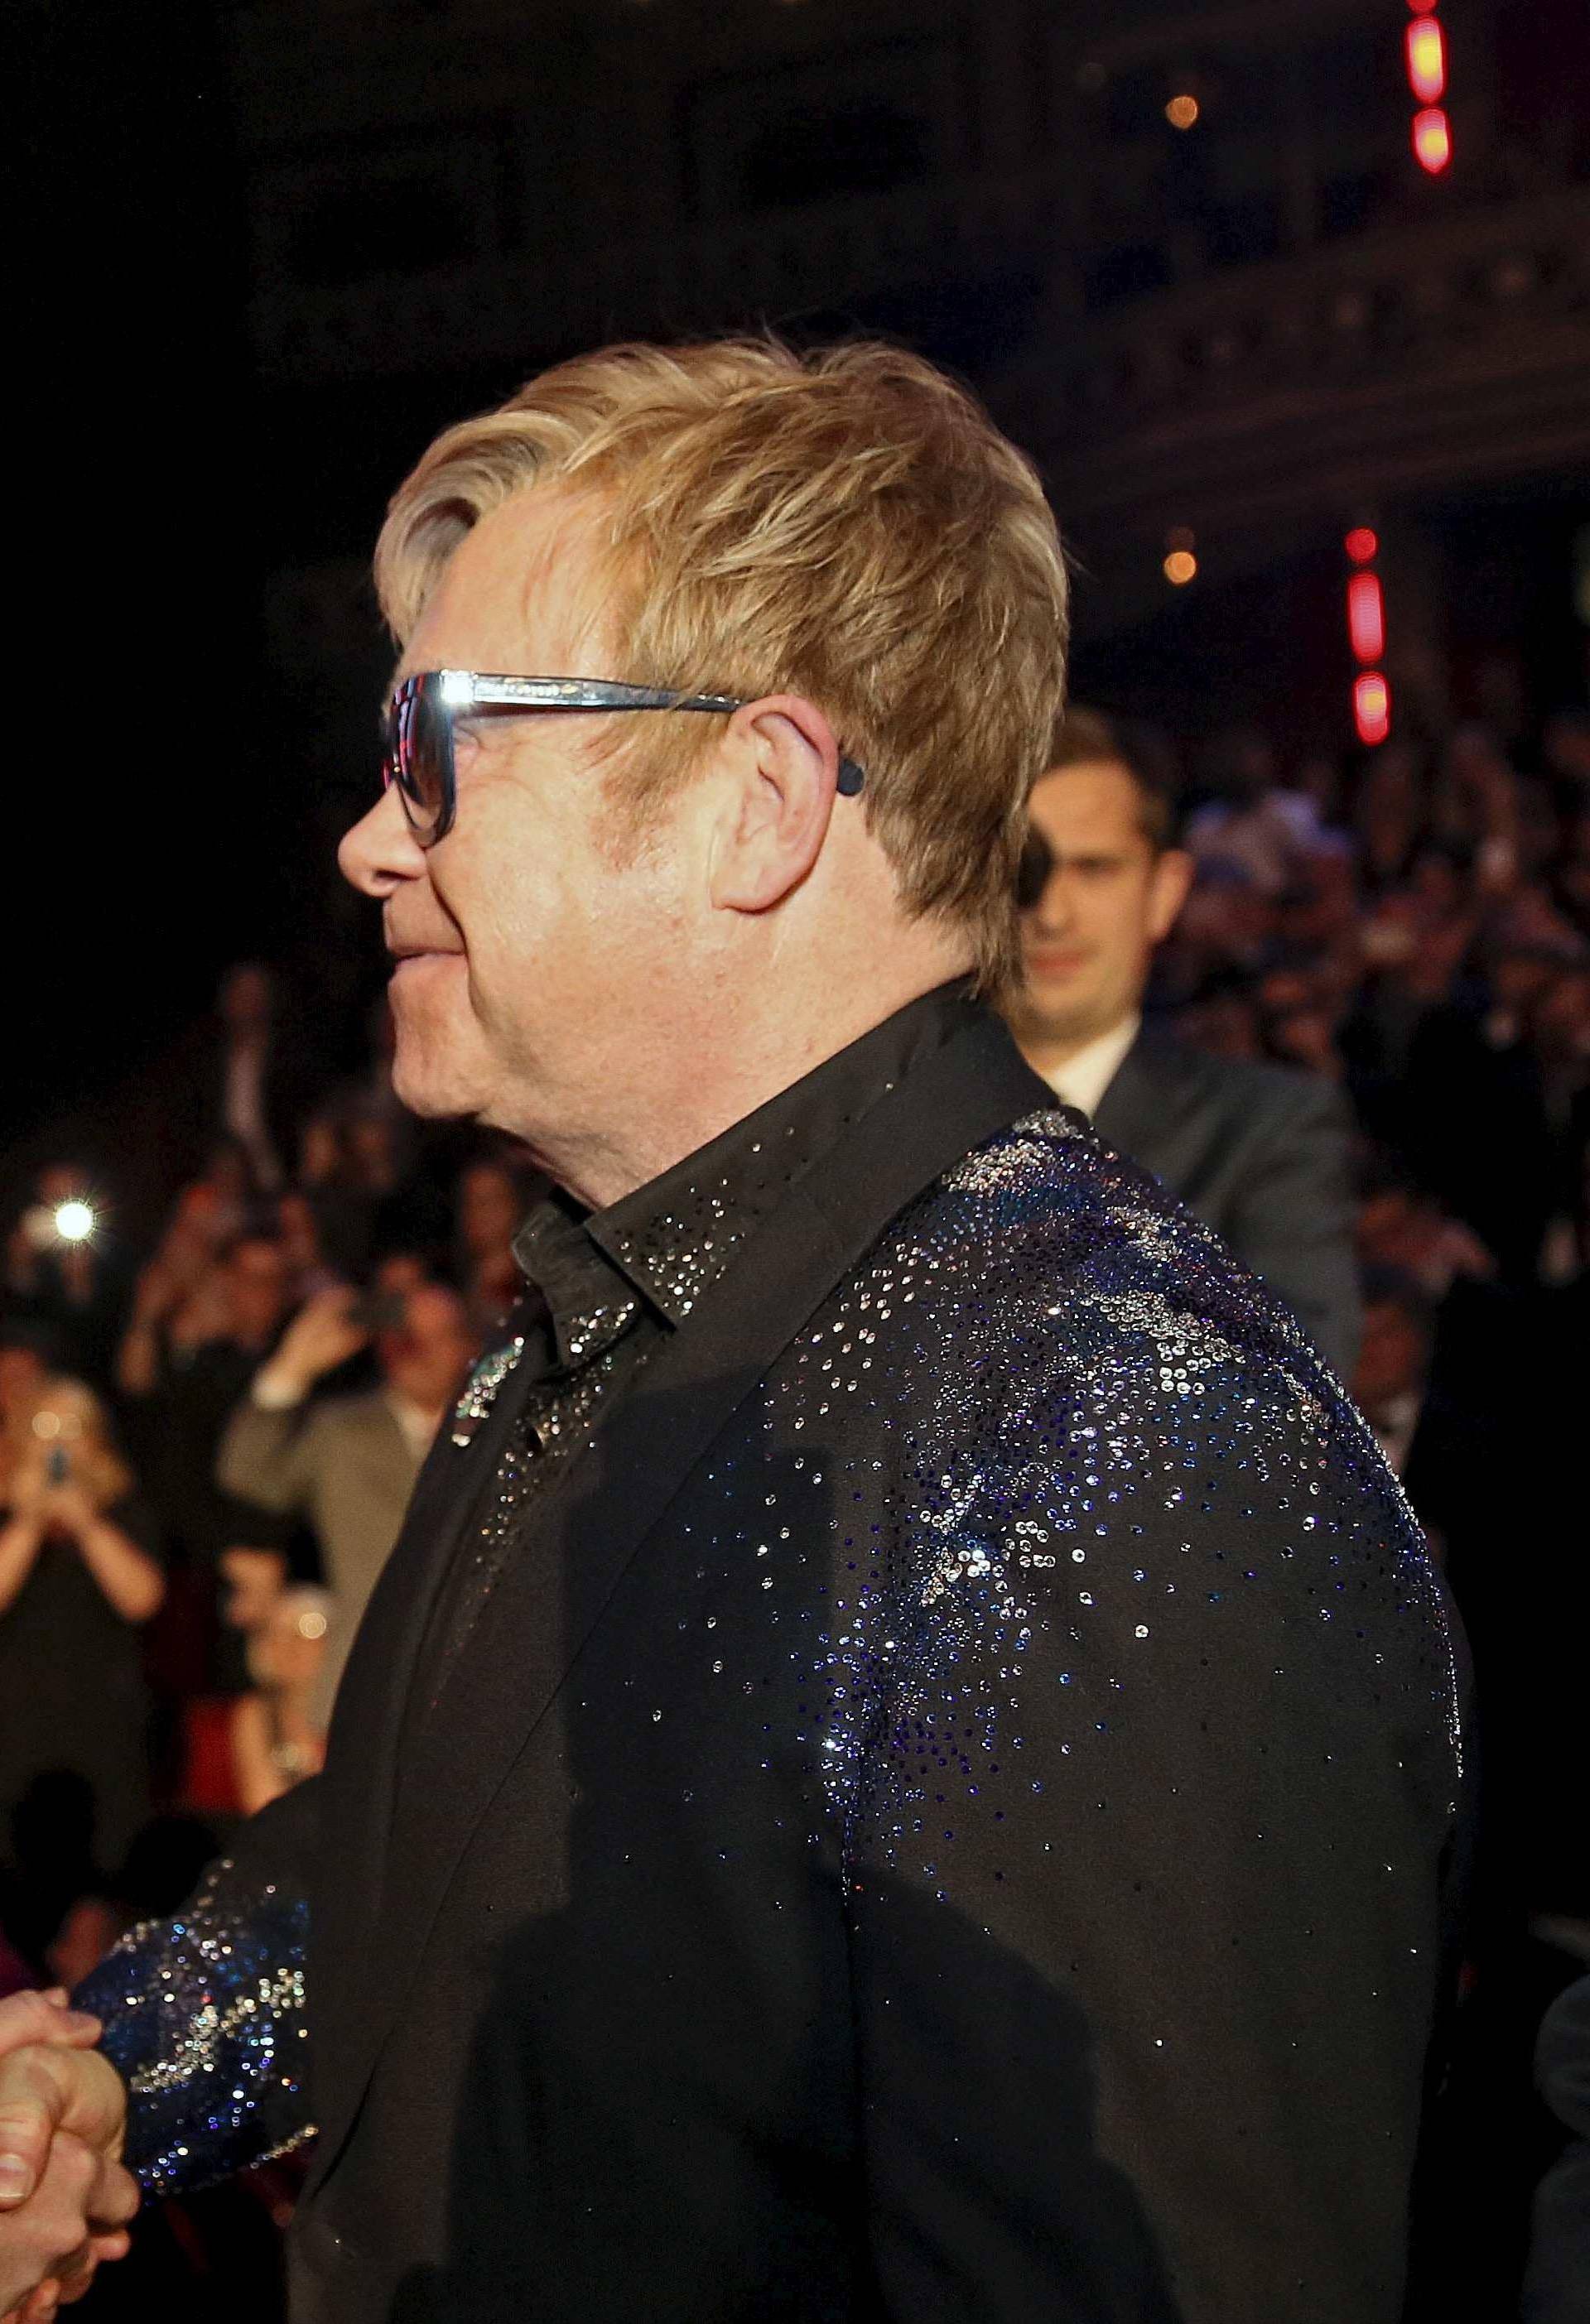 Britain's Prince Harry greets Elton John after the Royal Variety Performance at the Albert Hall in London